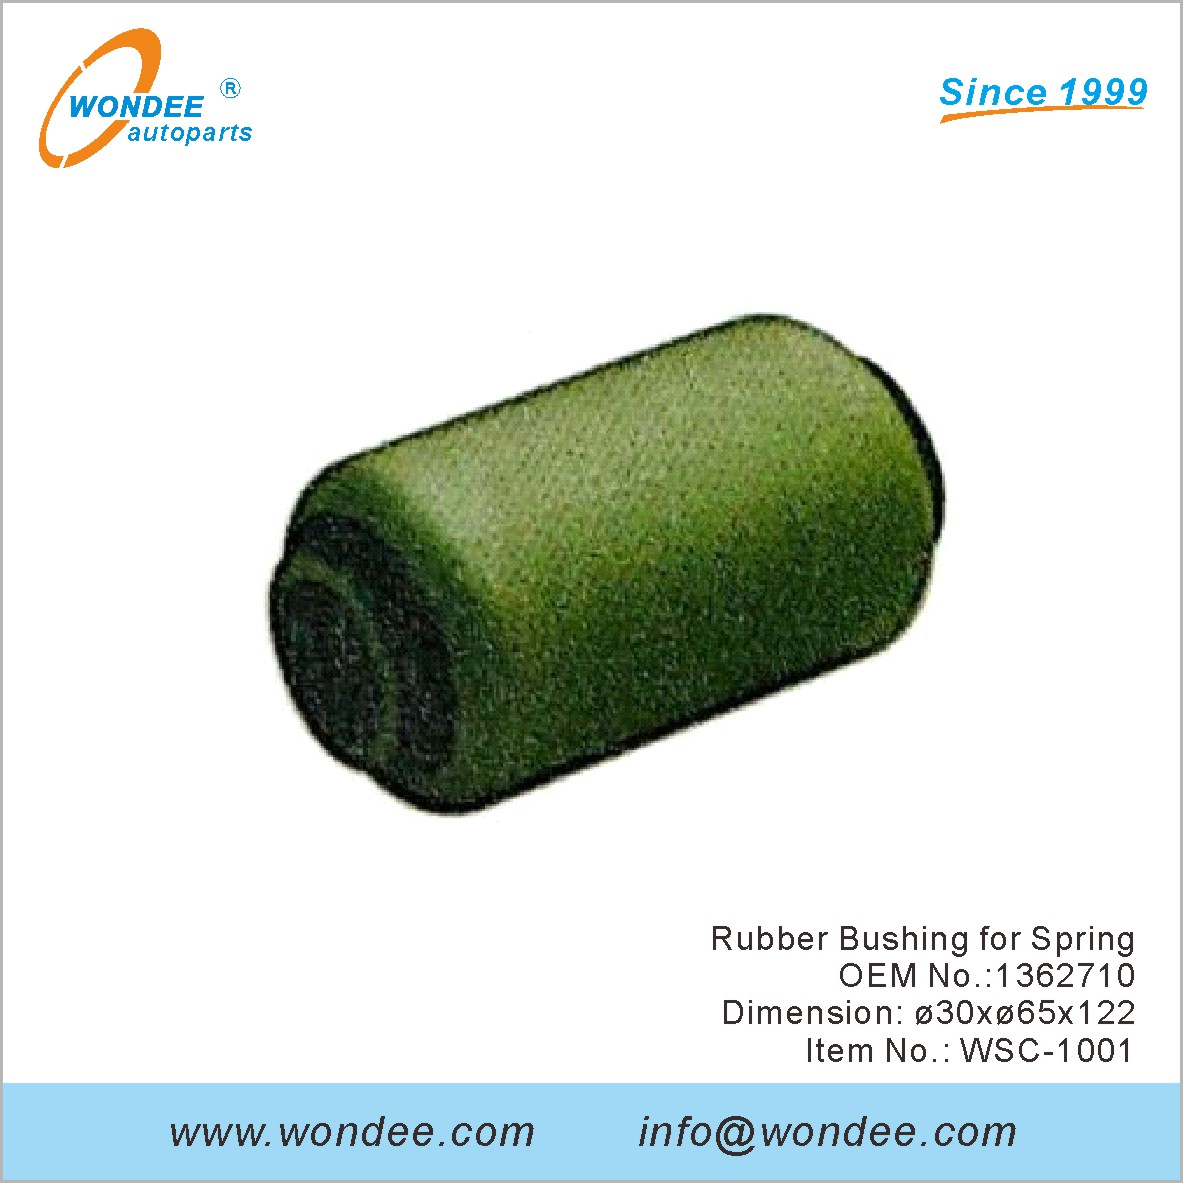 Rubber Bushing for Spring OEM 1362710 from WONDEE